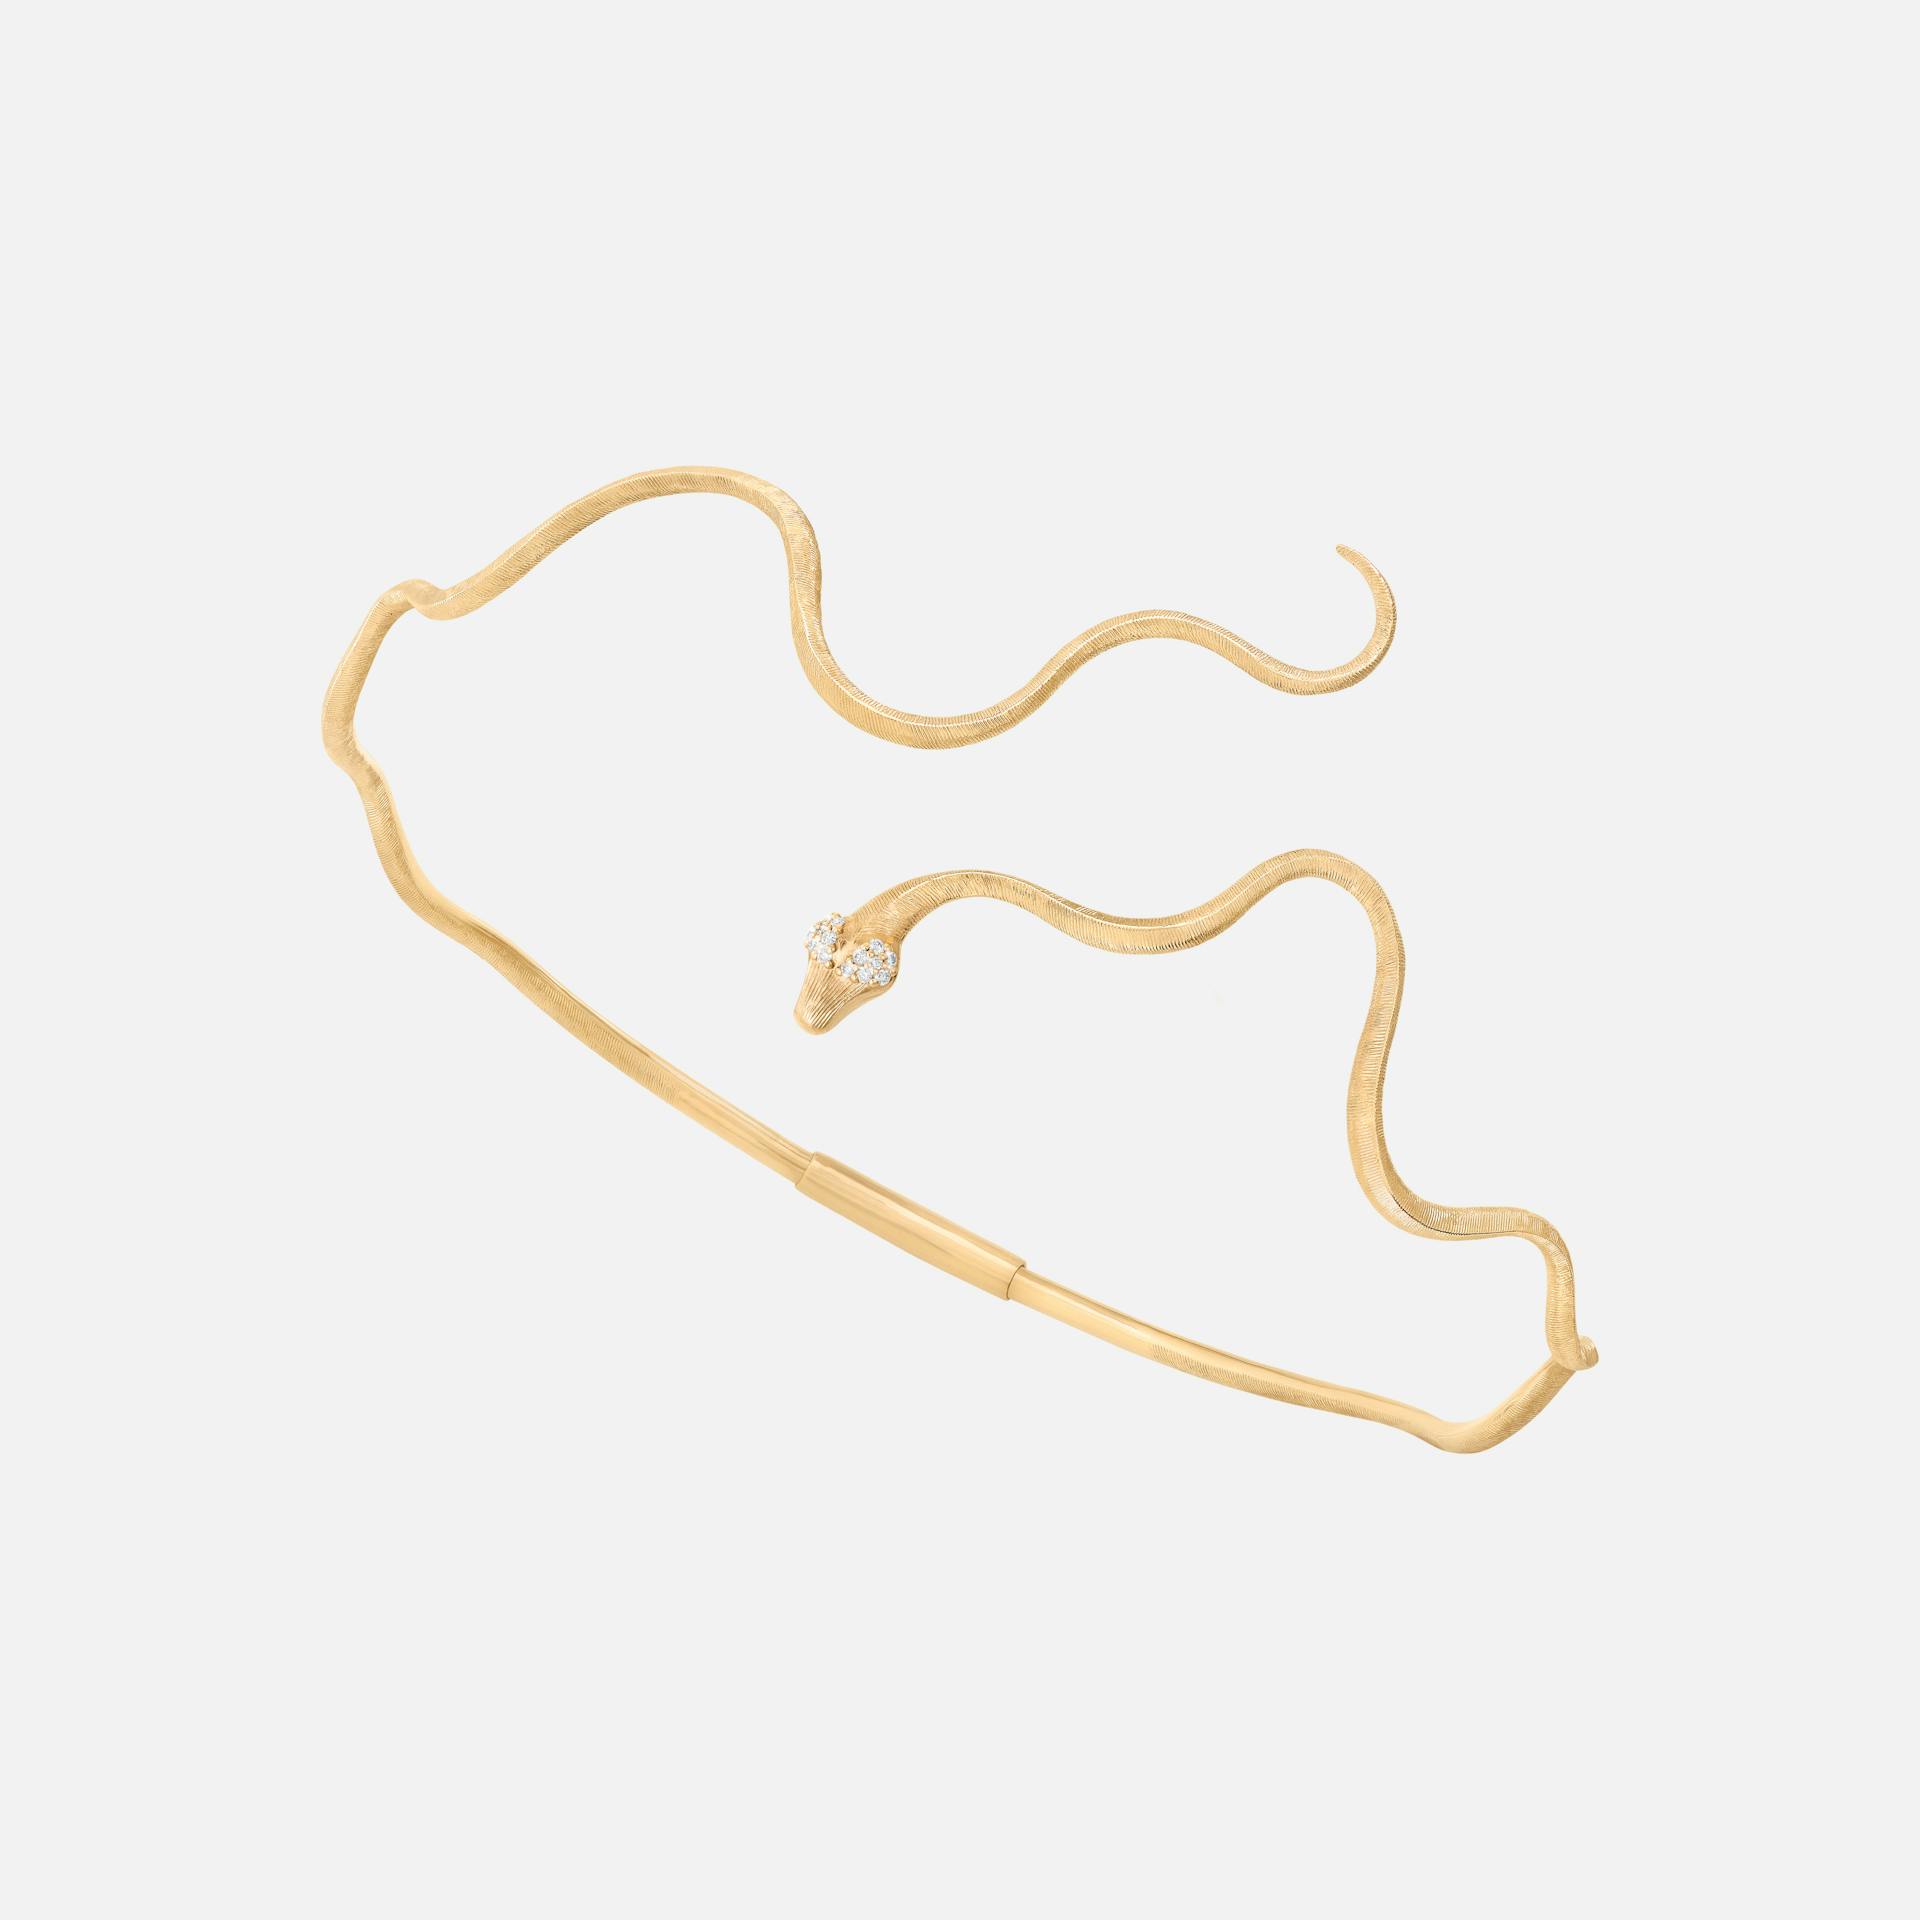 Snakes 33 cm Neck Bangle in Yellow Gold with Diamonds  |  Ole Lynggaard Copenhagen 